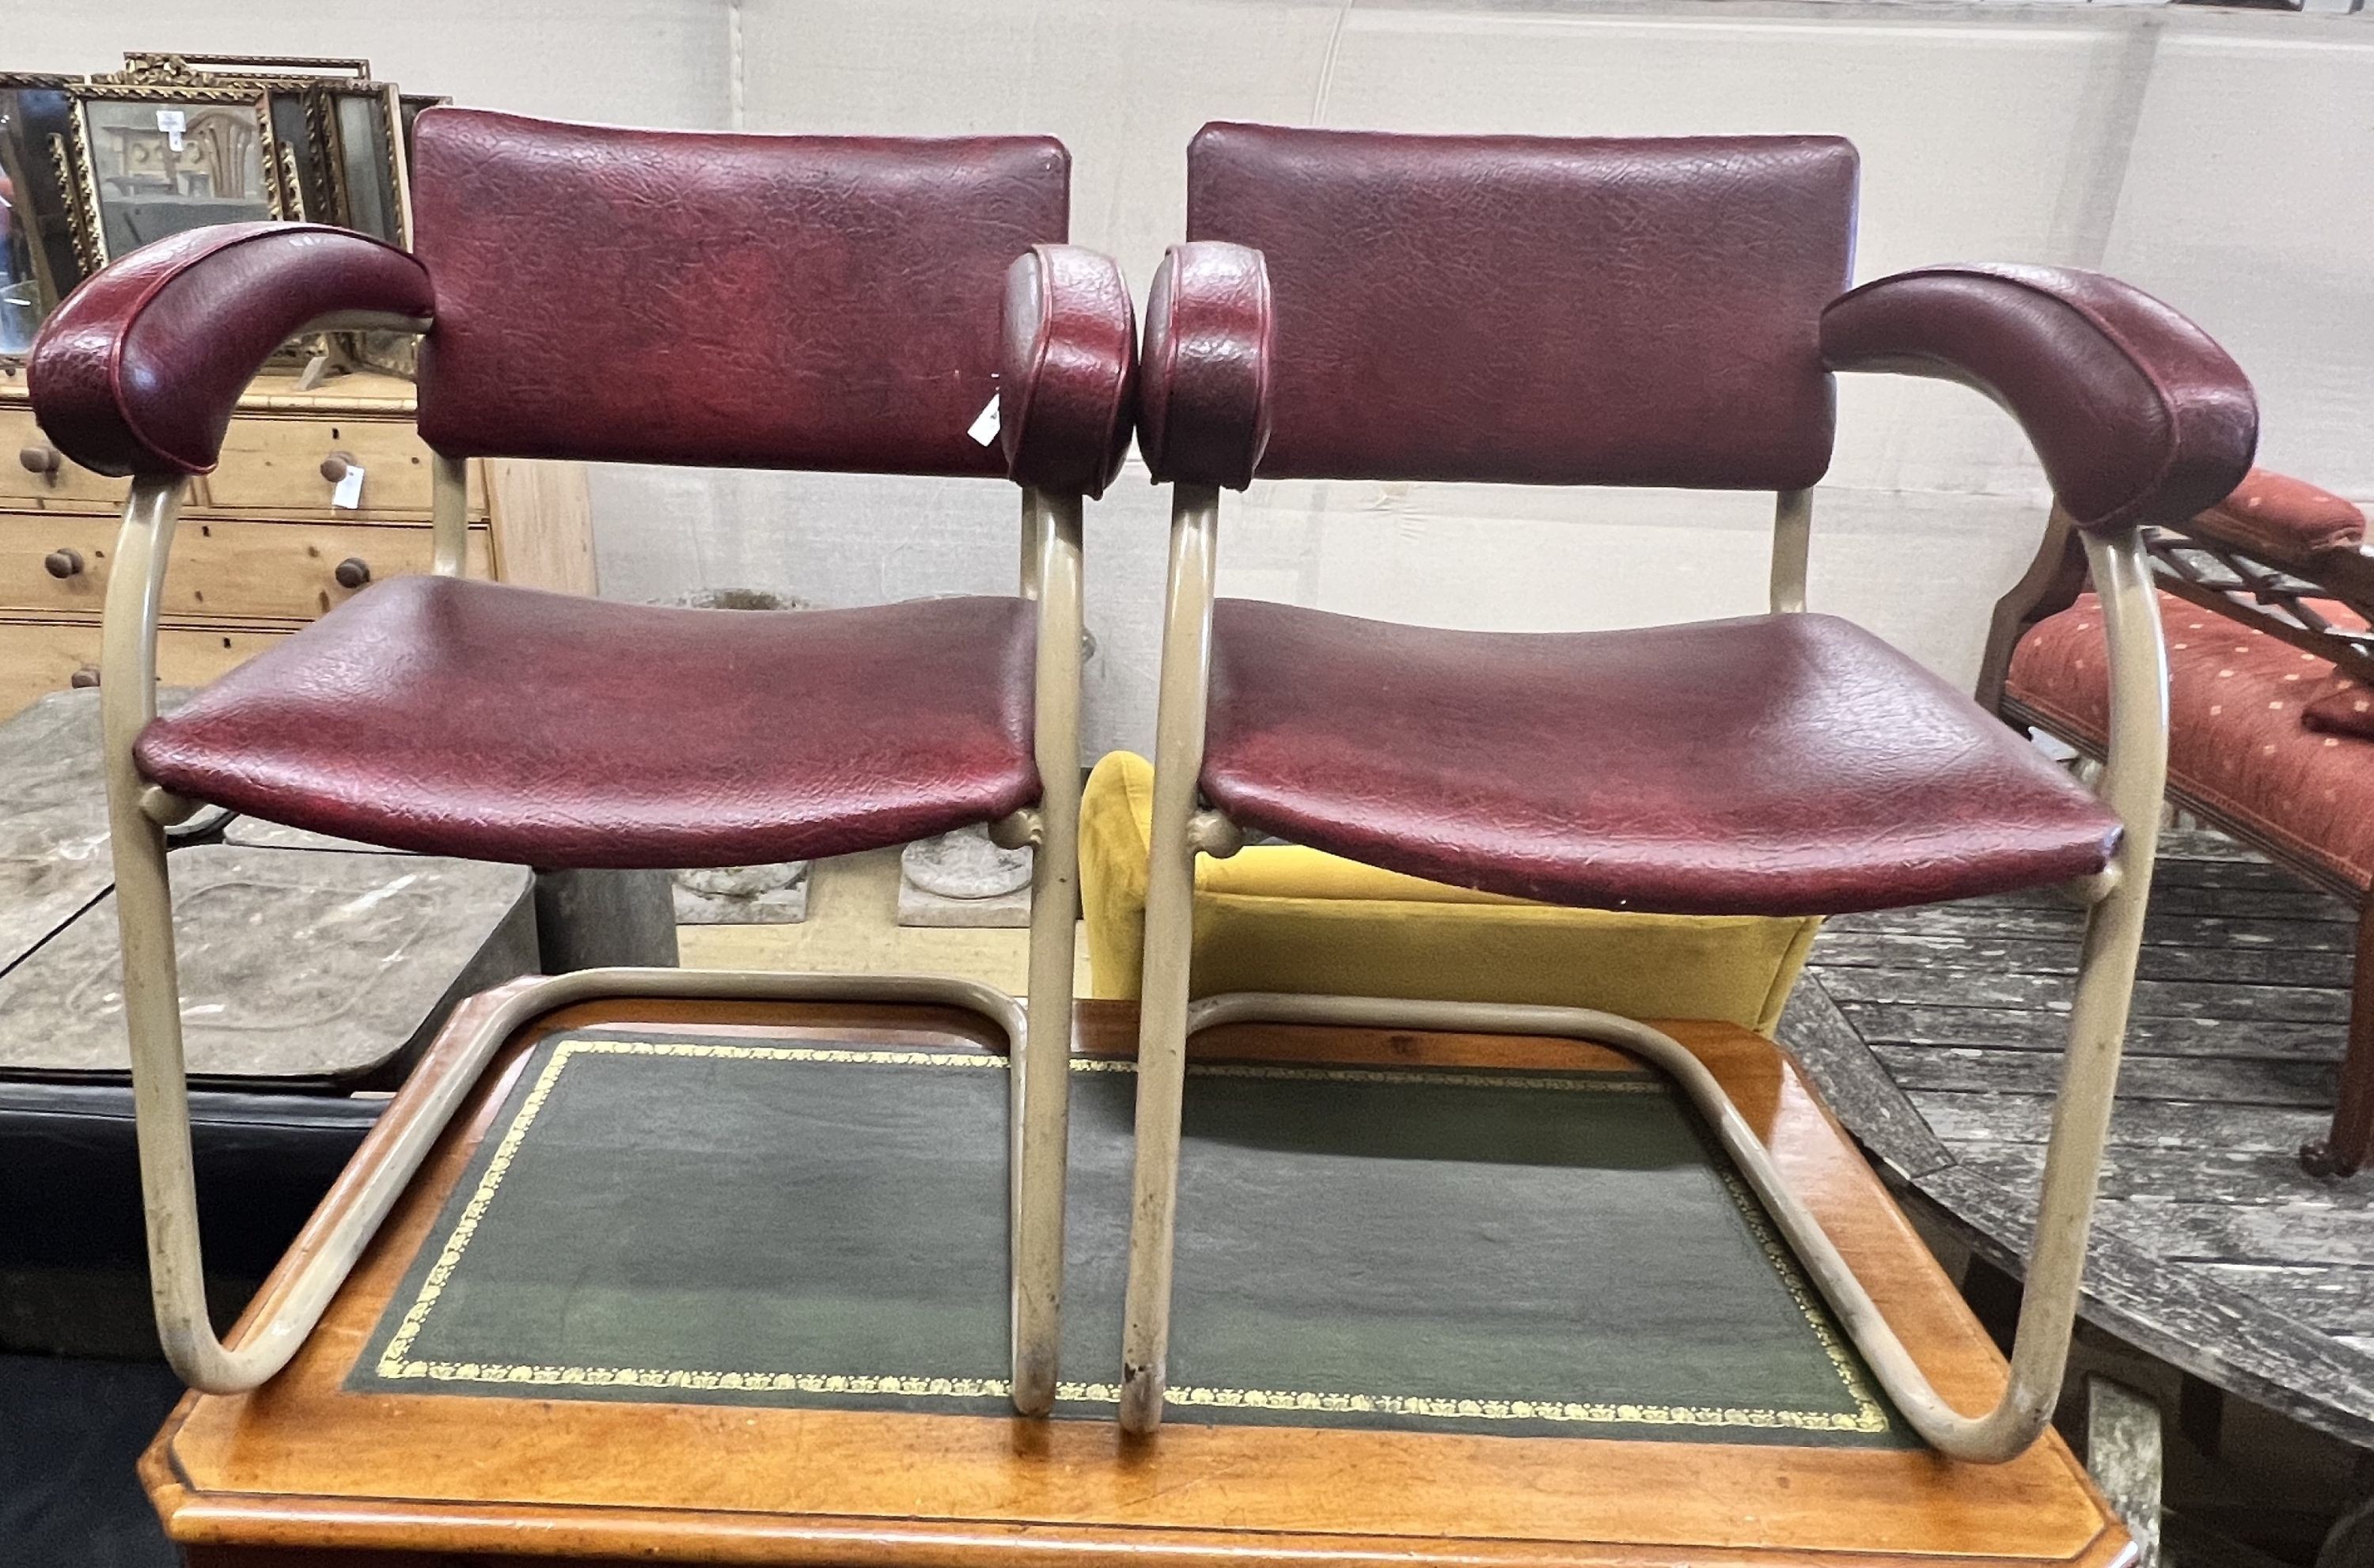 A pair of Pell elbow chairs, width 56cm depth 44cm height 78cm